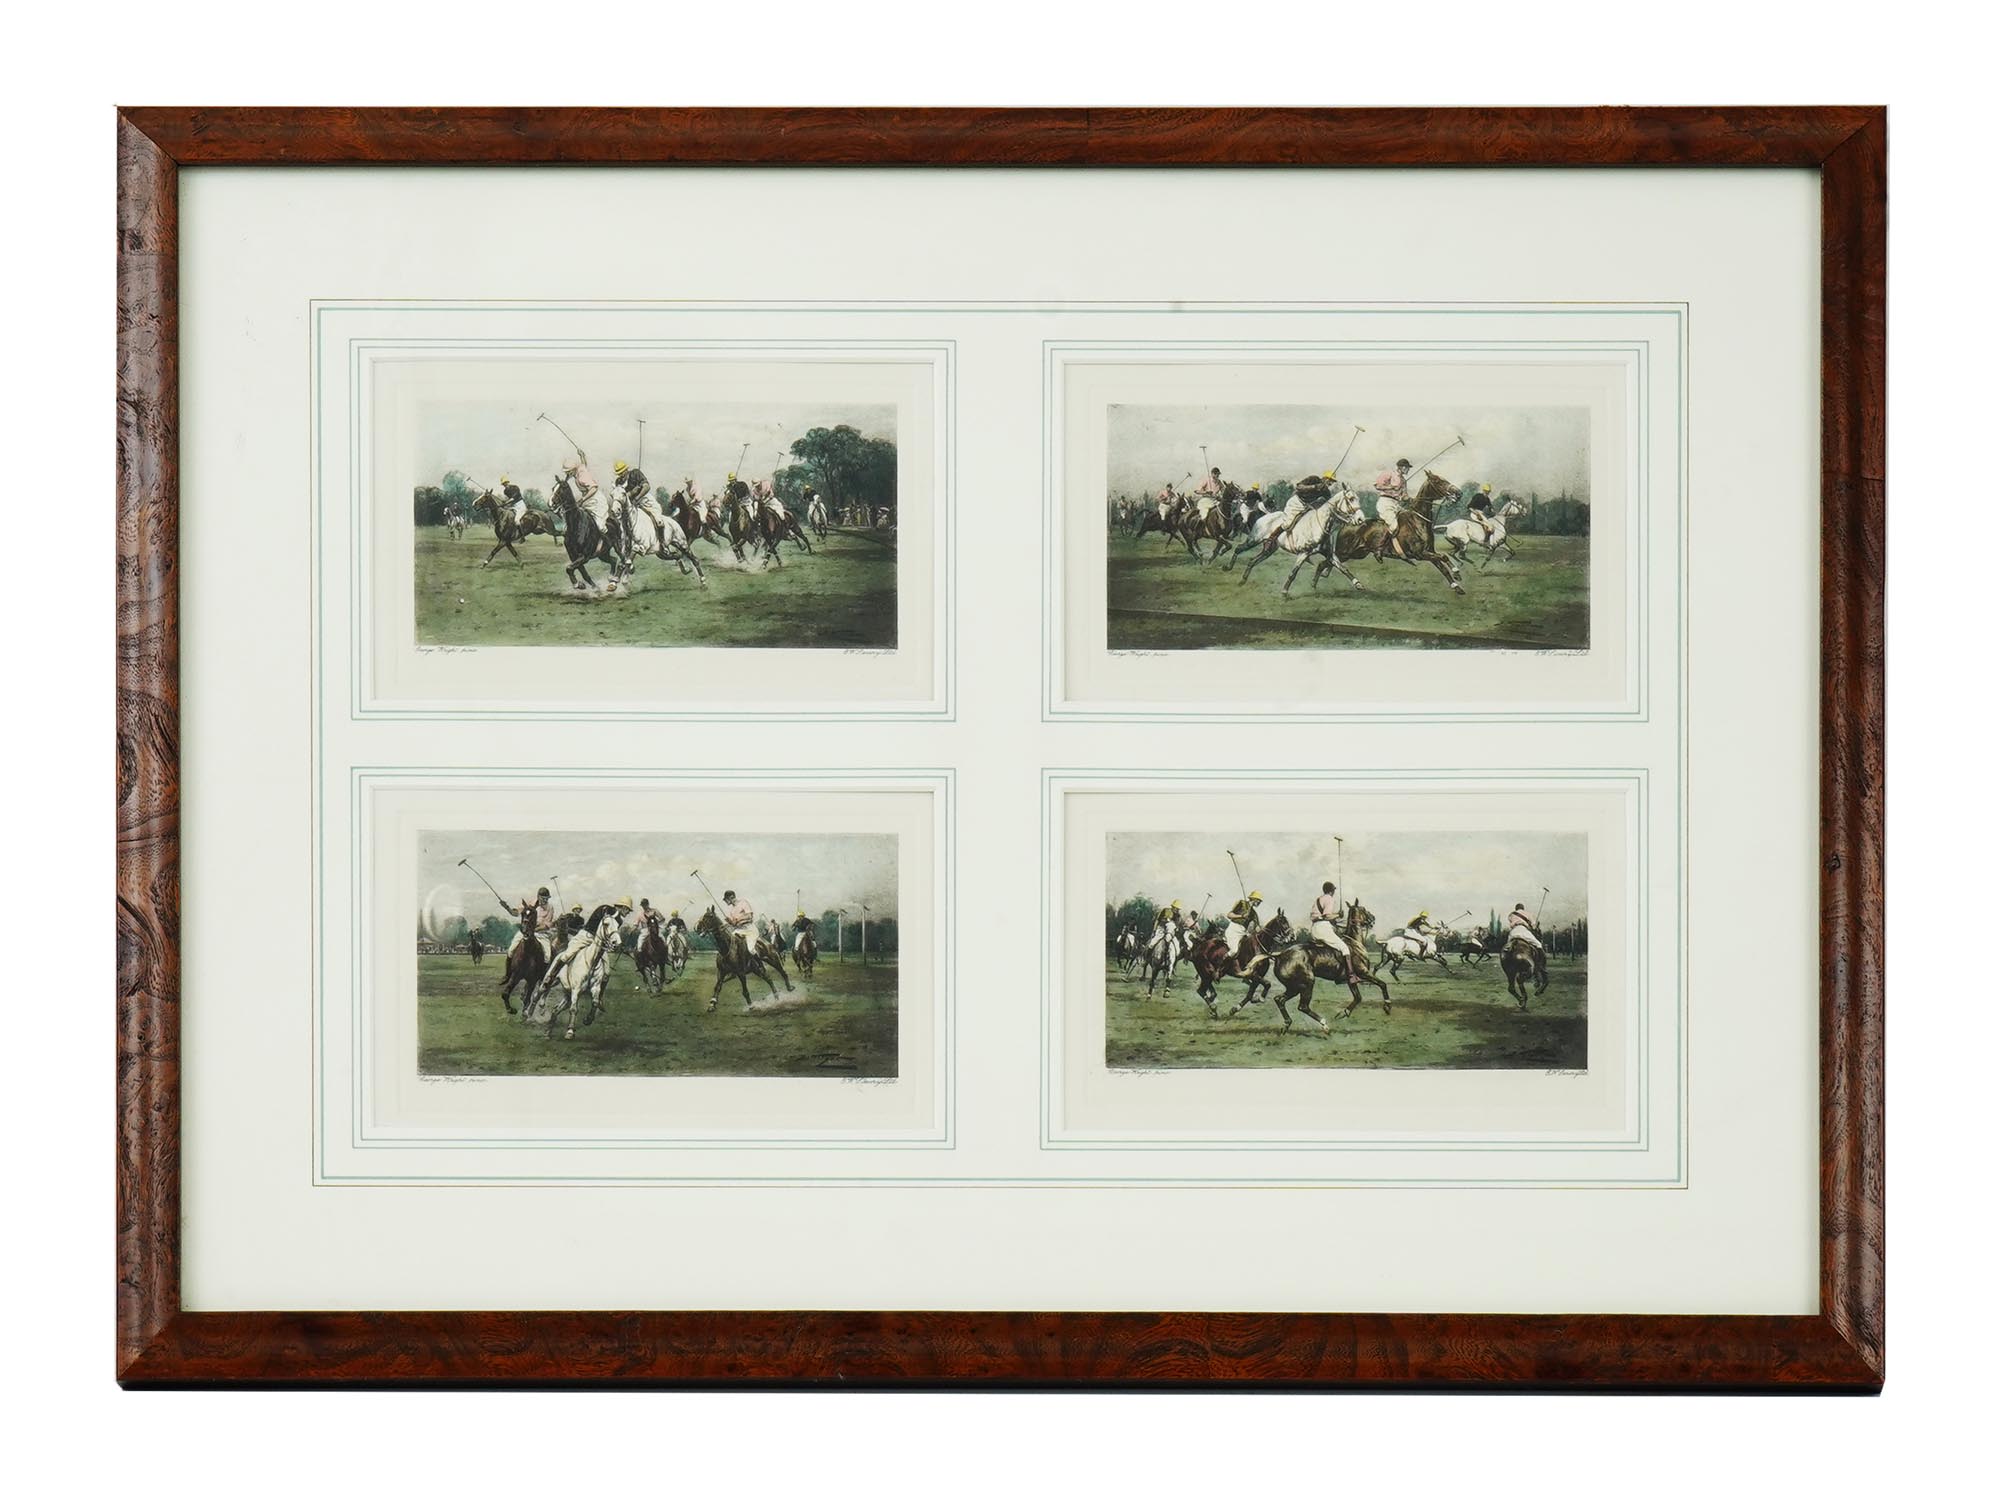 FOUR POLO SCENE COLOR LITHOGRAPHS AFTER GEORGE WRIGHT PIC-0